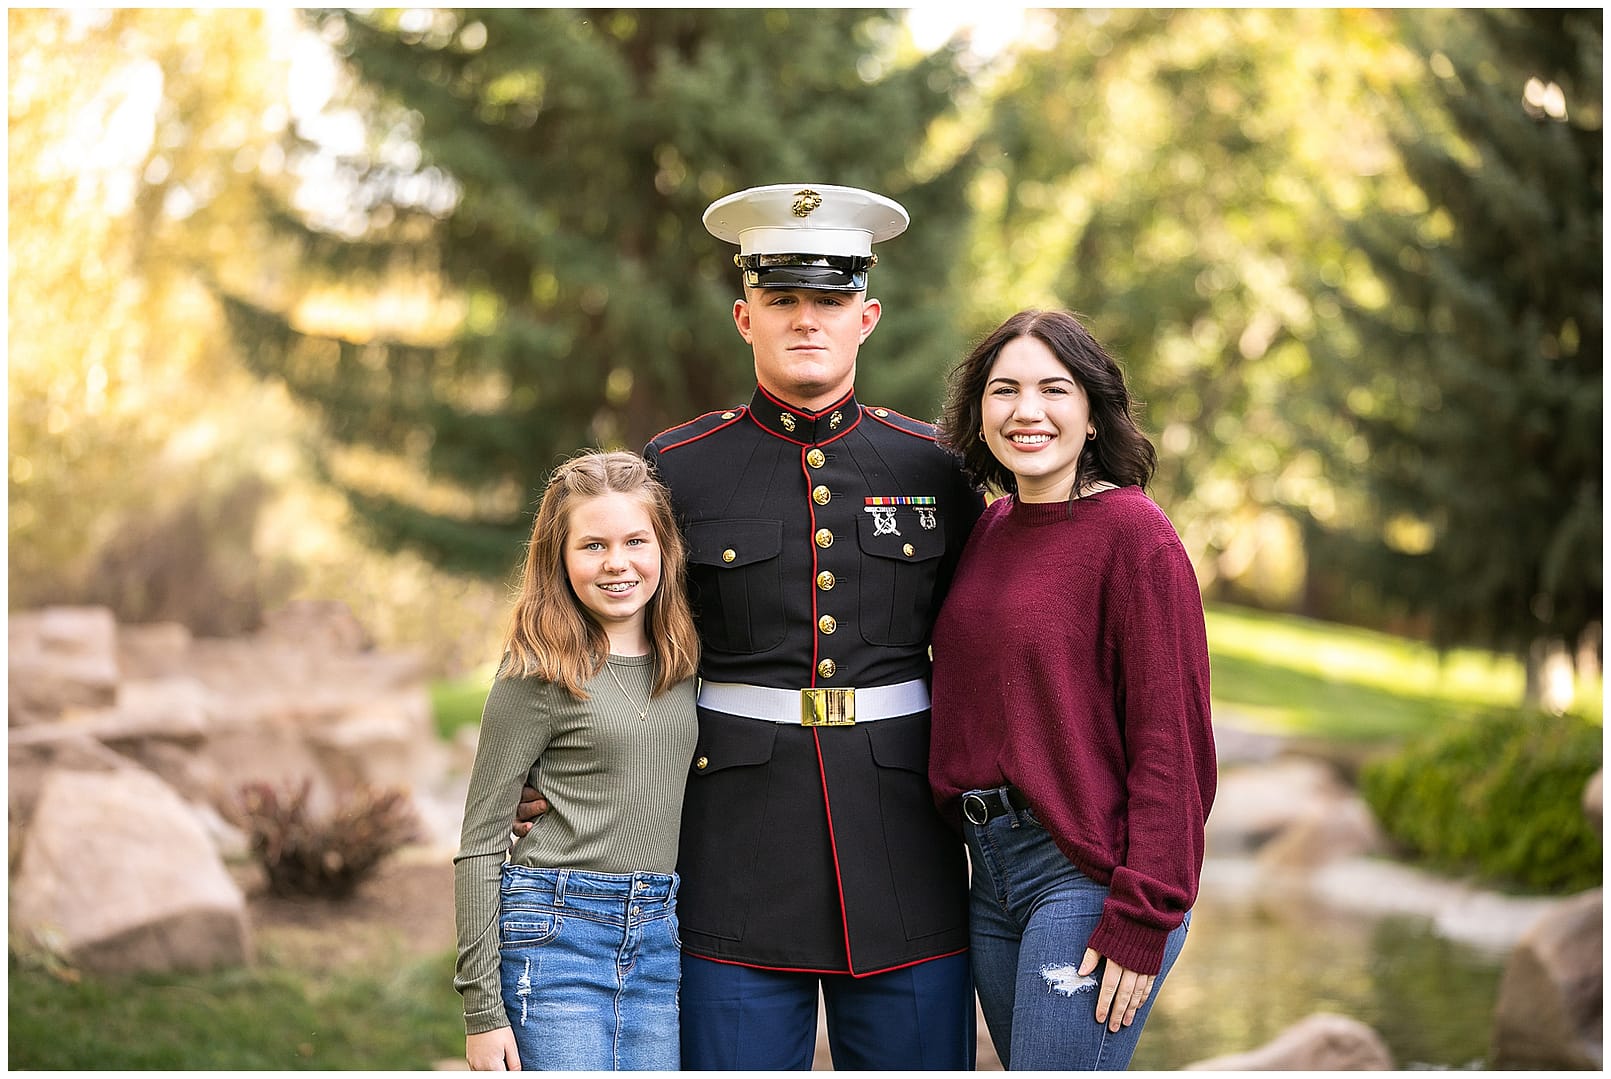 Young man in dress blues with siblings. Photo by Tiffany Hix Photography.